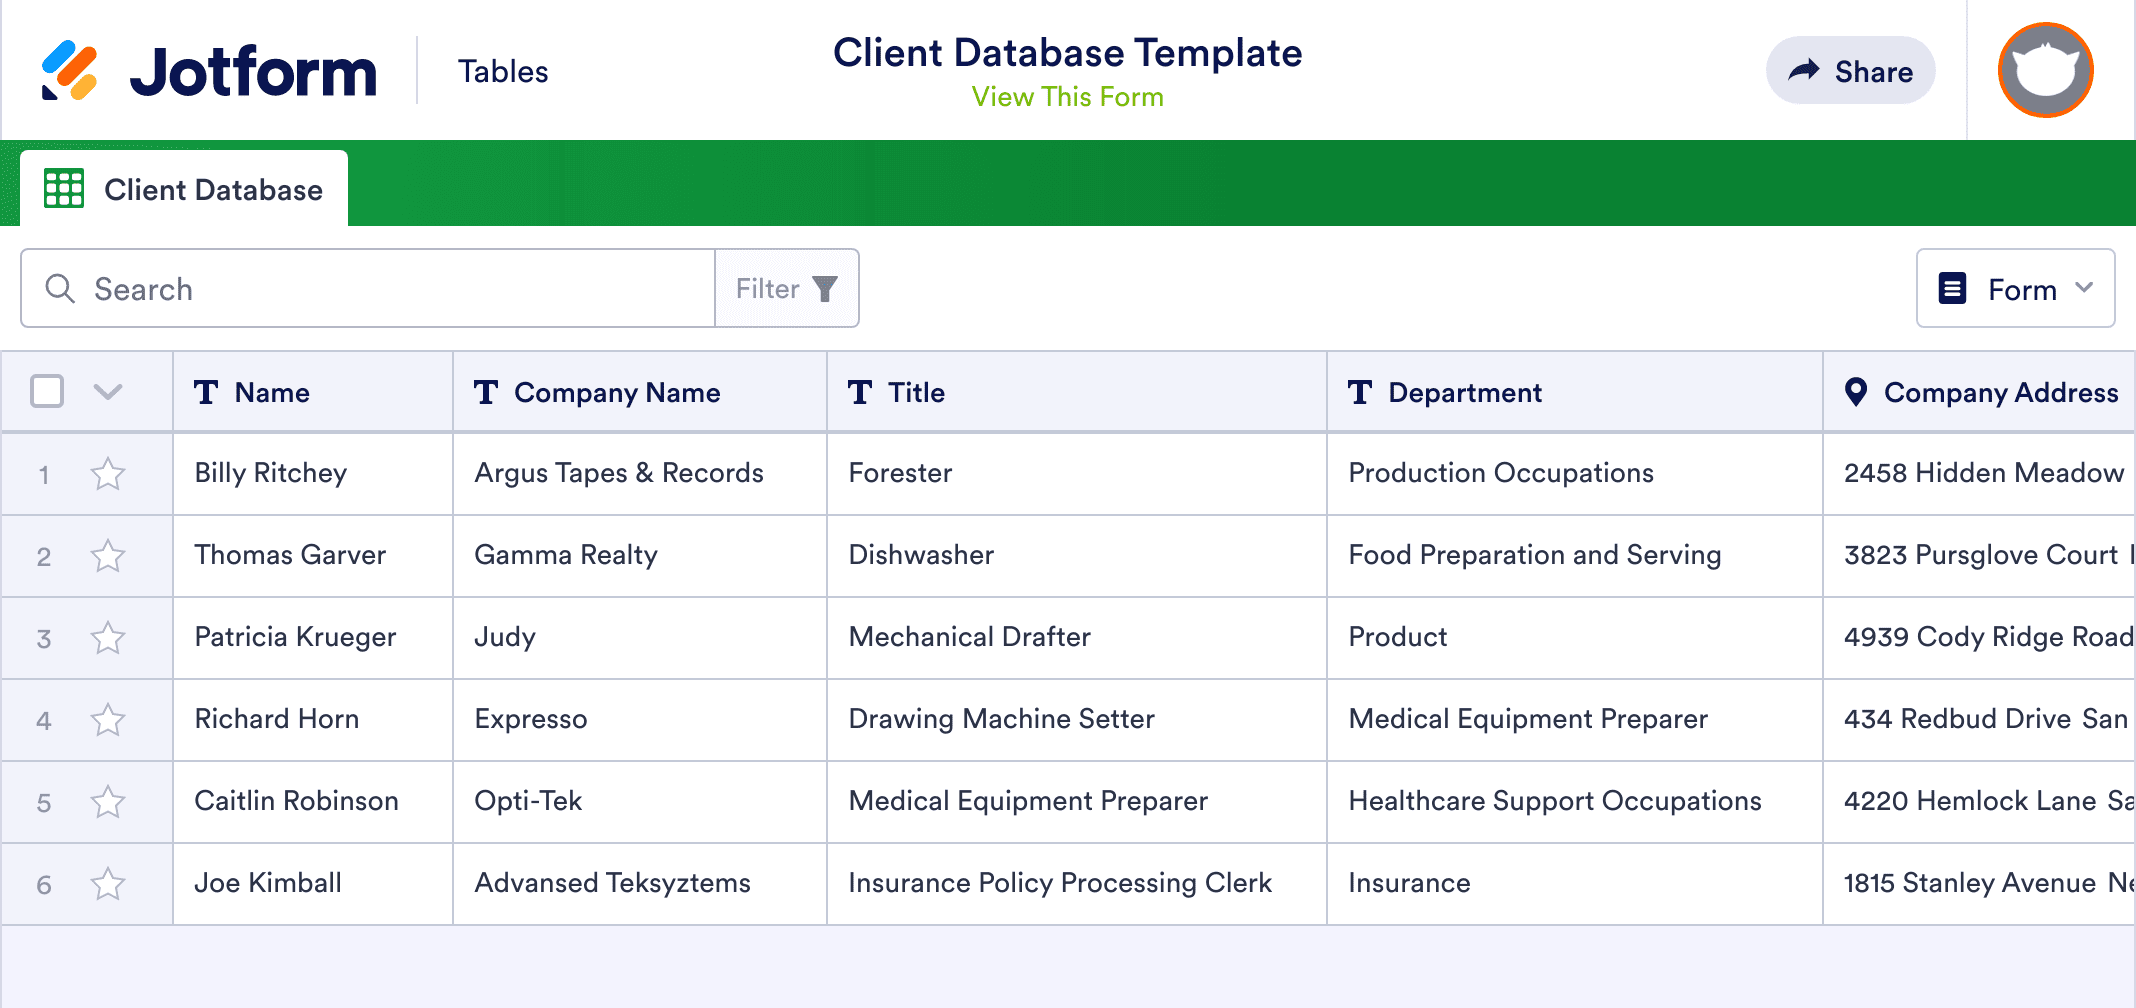 Client Database Template